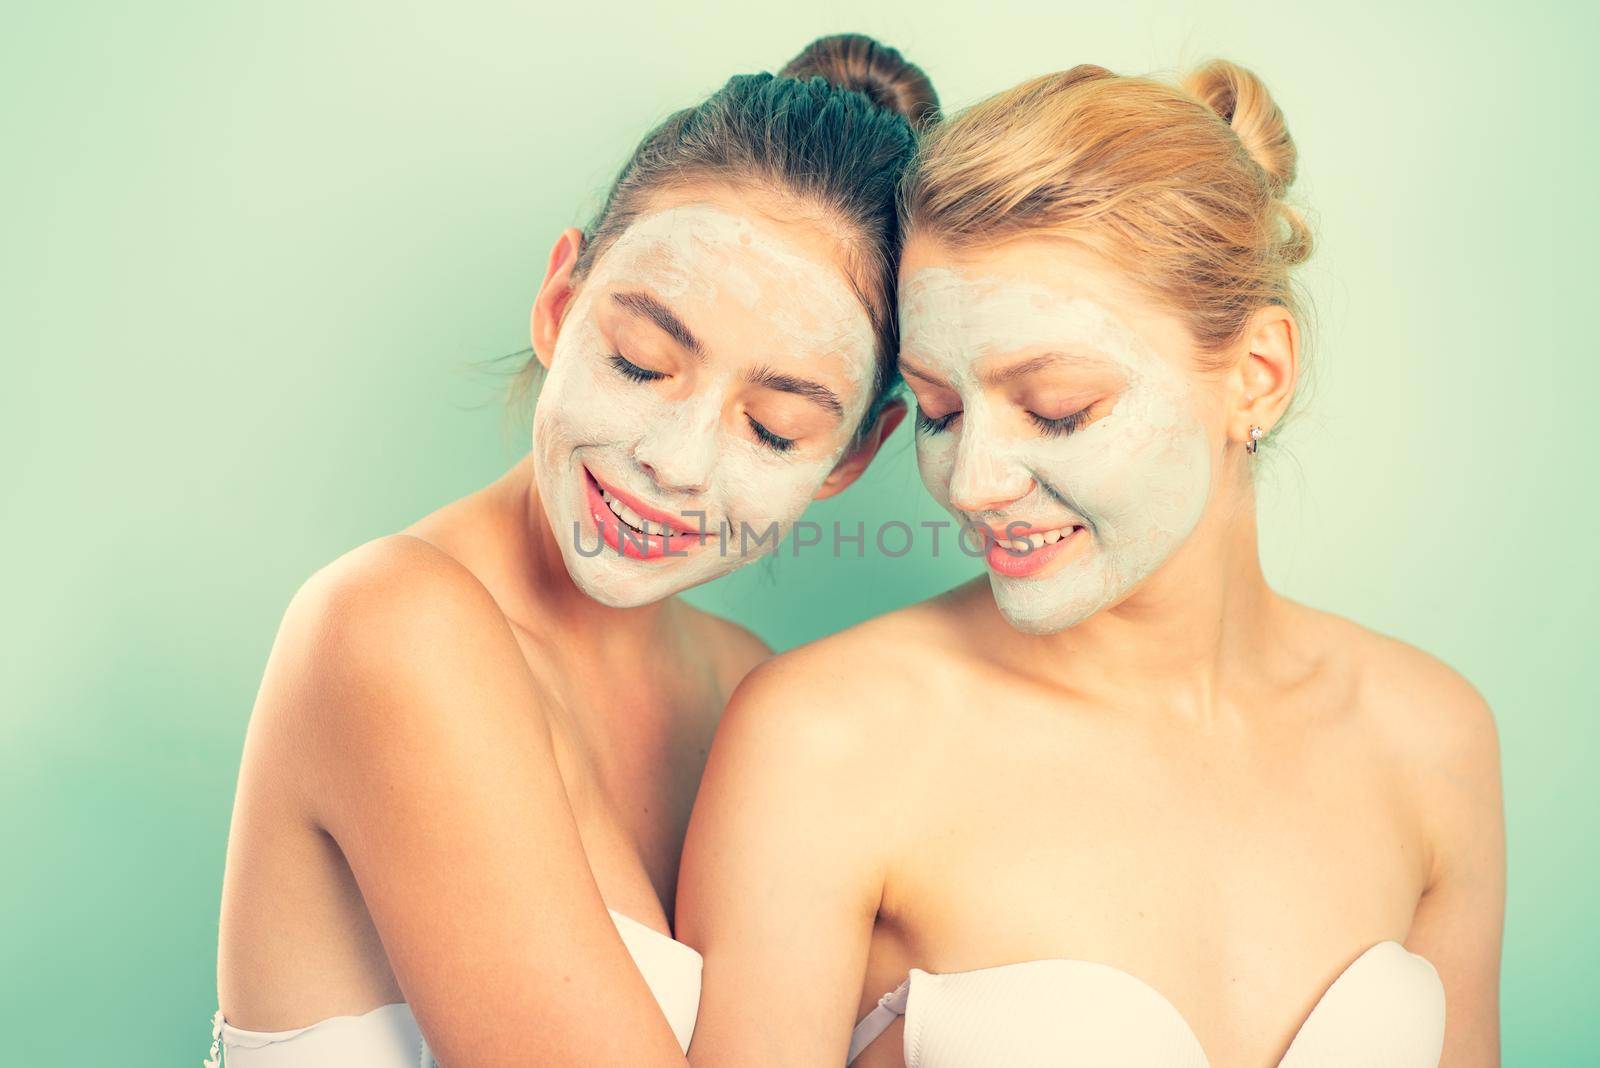 Friendly young beautiful girls with bare shoulders apply organic face mask and smile. Blond and dark hair women make skincare. Friendship and young natural beauty concept